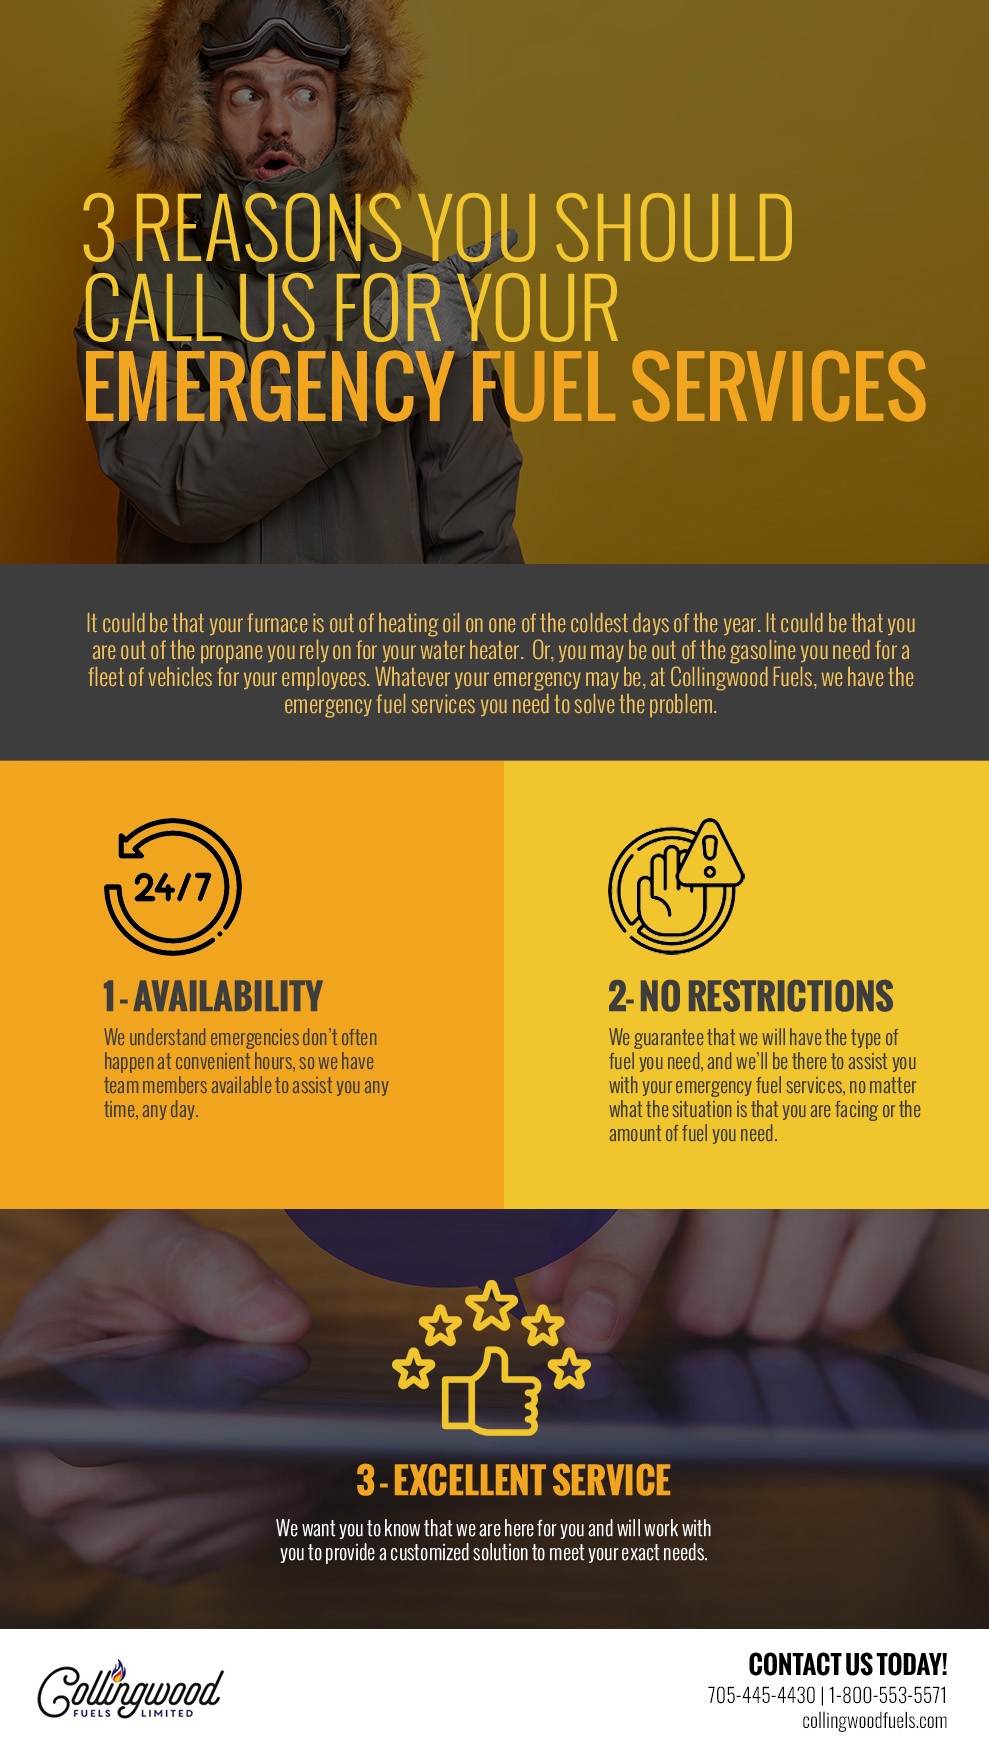 3 Reasons You Should Call Us for Your Emergency Fuel Services [infographic]